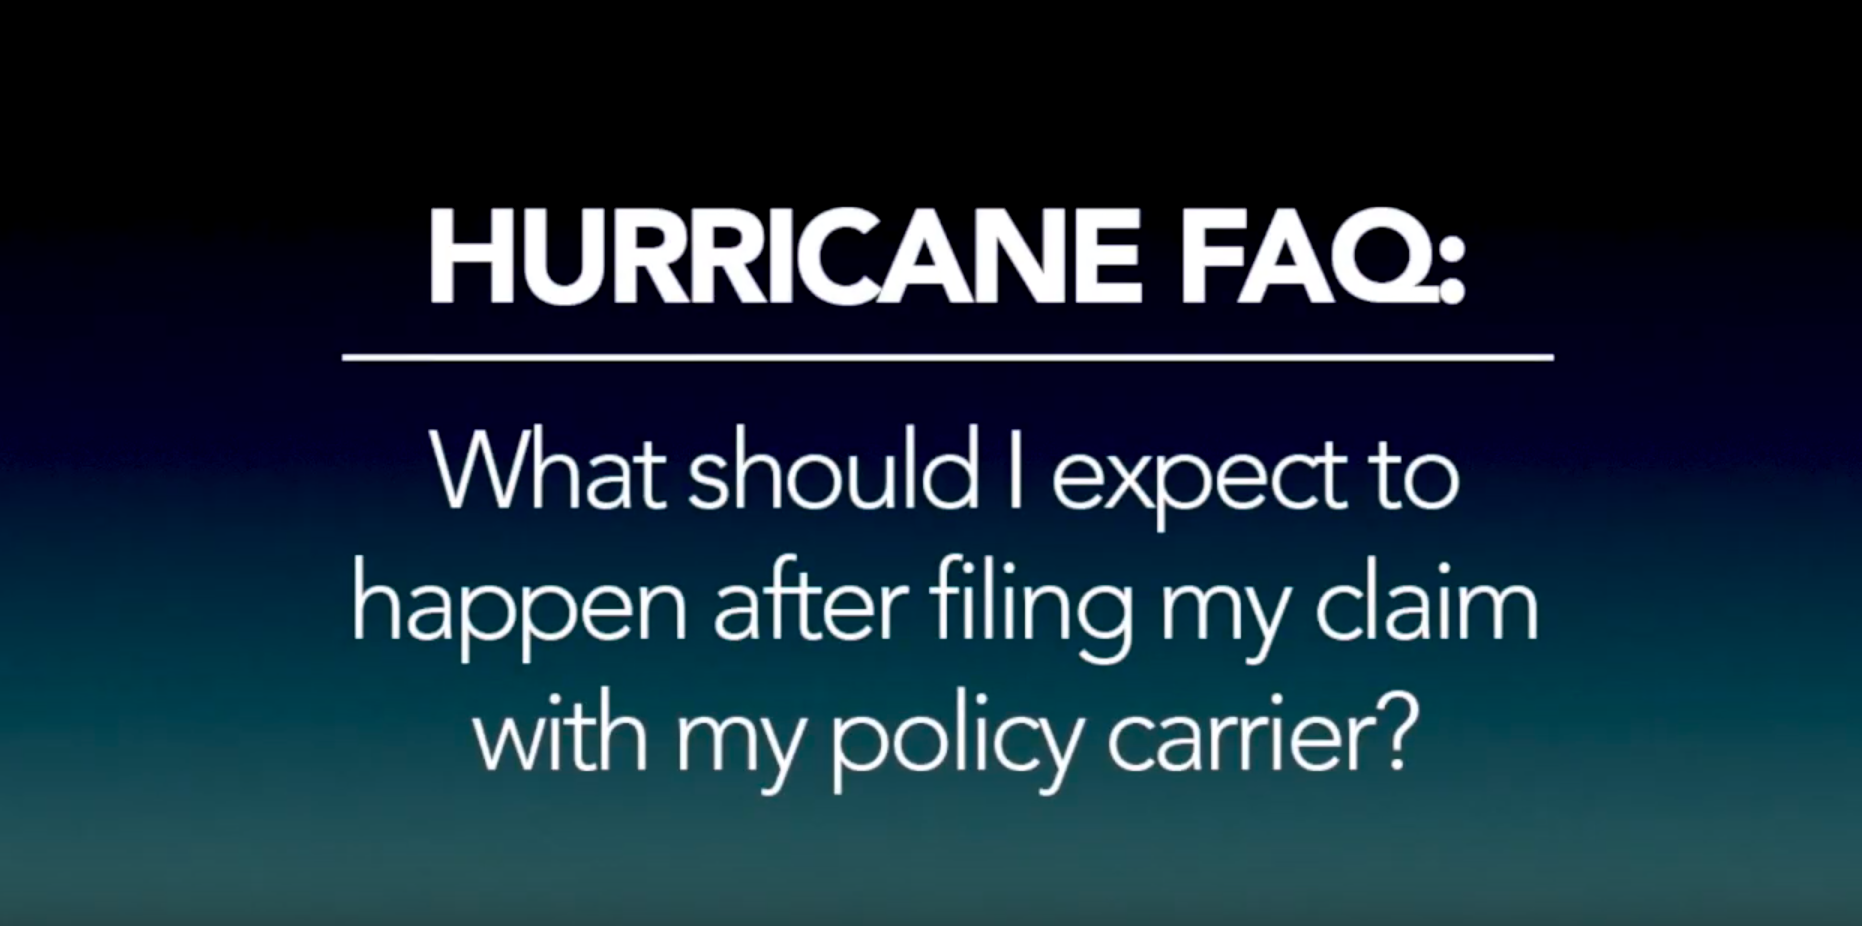 Hurricane FAQ – What should I expect after filing a claim?